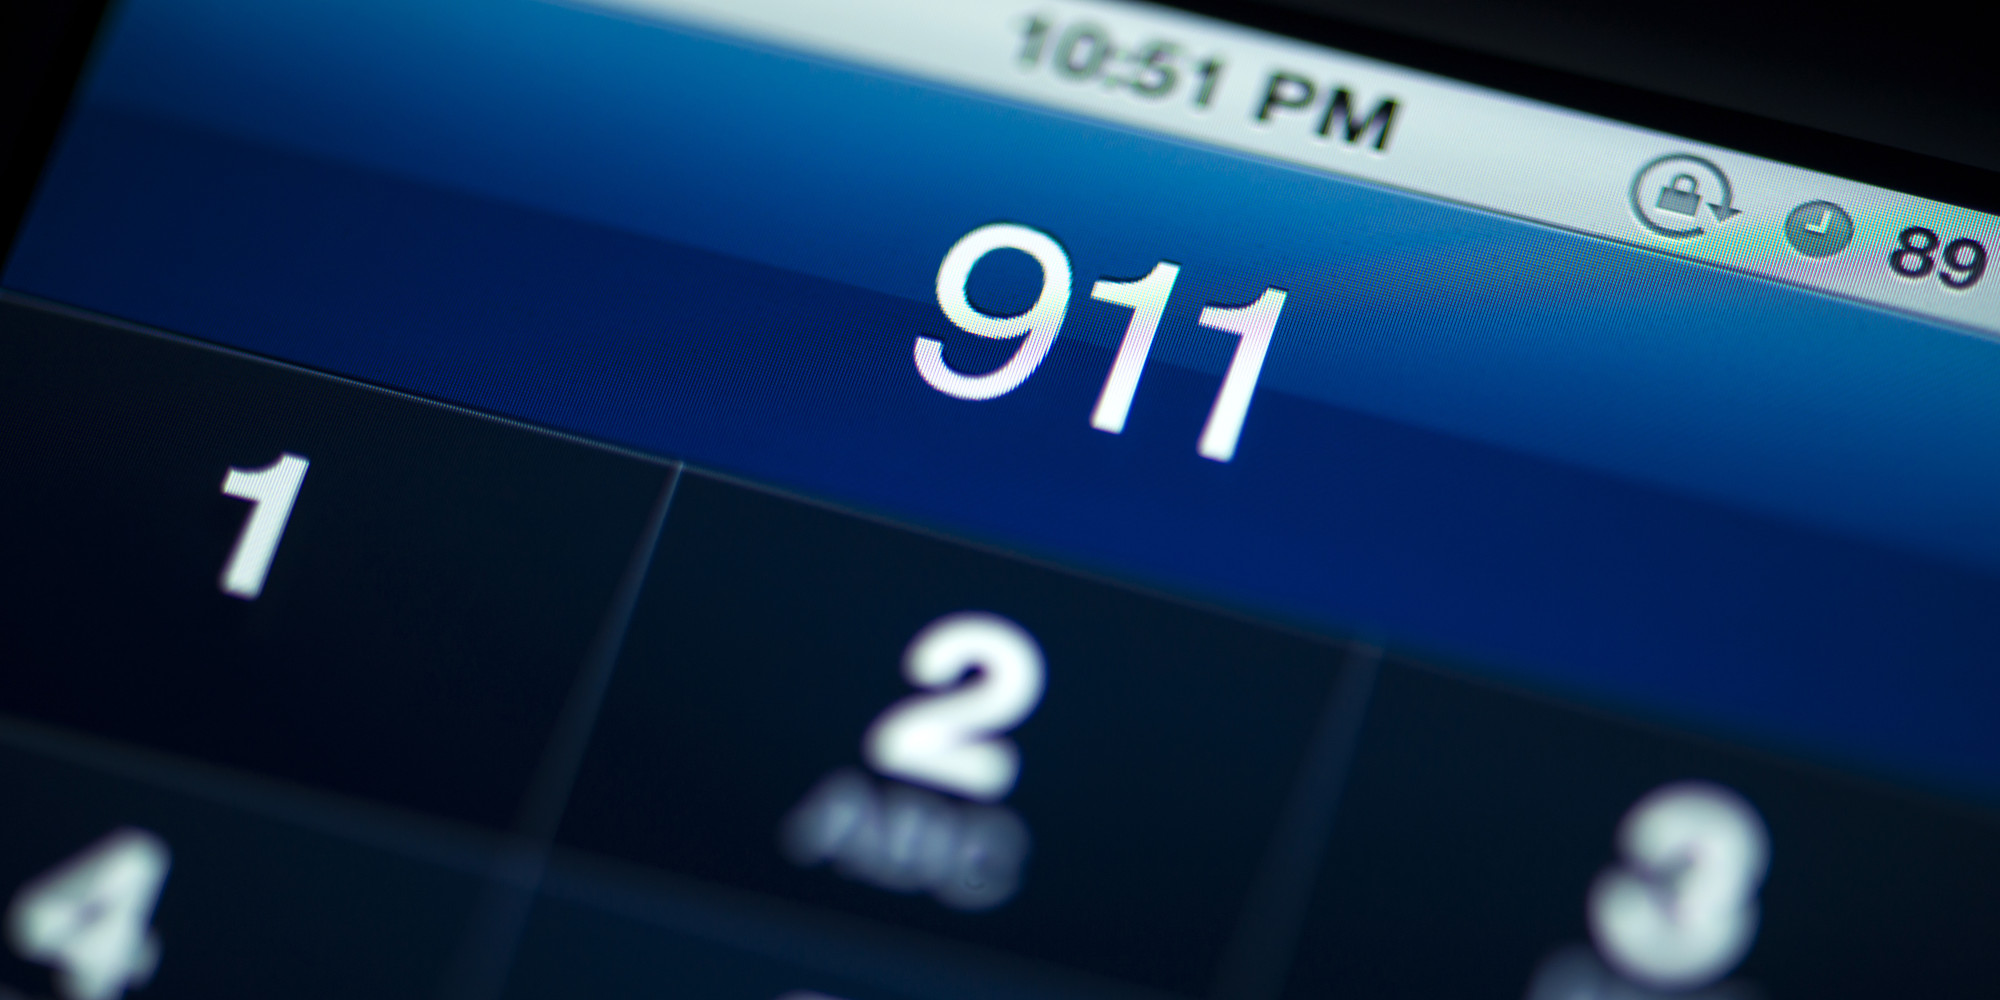 News Without Politics, follow us, Here's everything you need to know about texting 911 